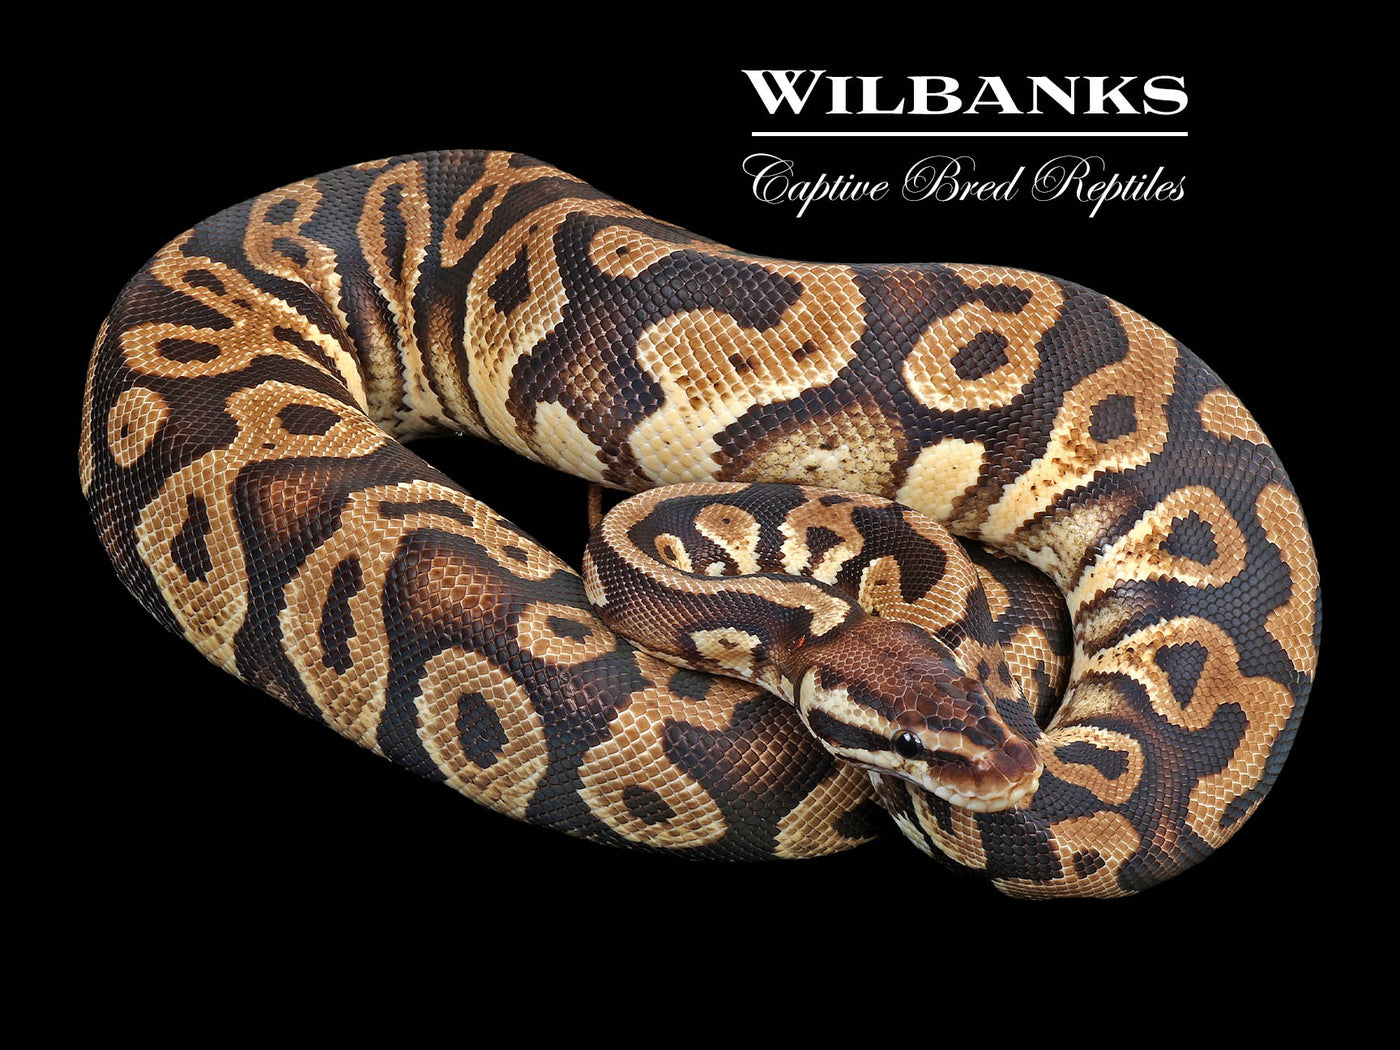 Pastel Yellow Belly or Gravel Ball Python ♀ '22